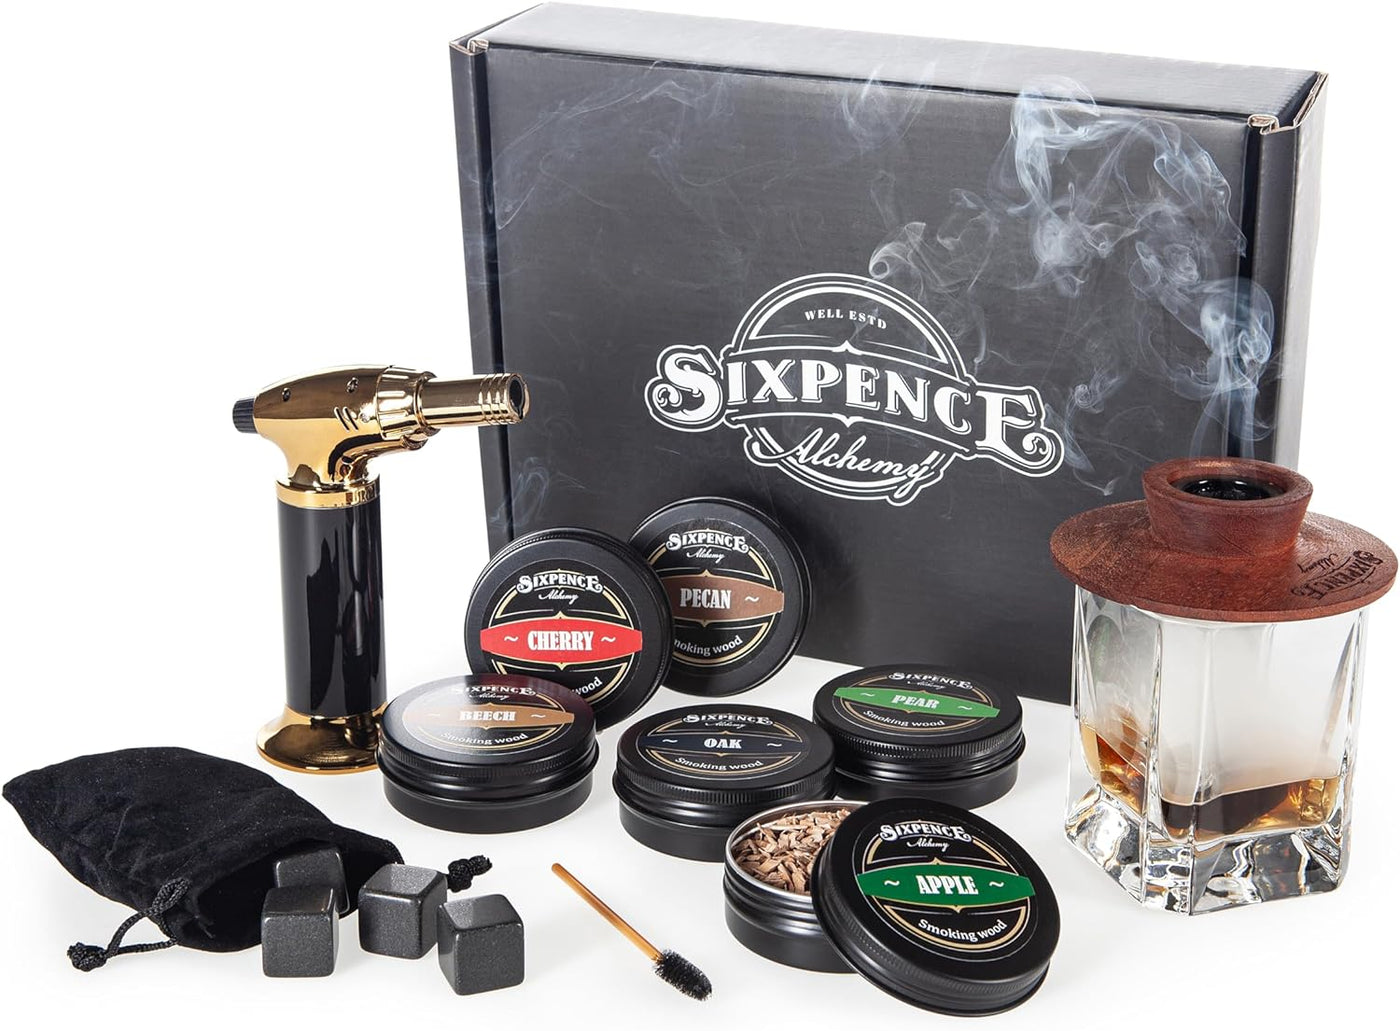 Cocktail Smoker Kit With Torch. Smoking Kits include Hardwood Whisky Smoker; Oak, Cherry & Hickory Wood Chips; Butane Torch. Deluxe Smoke Infusion Set. Smoke Cocktails, Drinks, Bourbon, Old Fashioned.